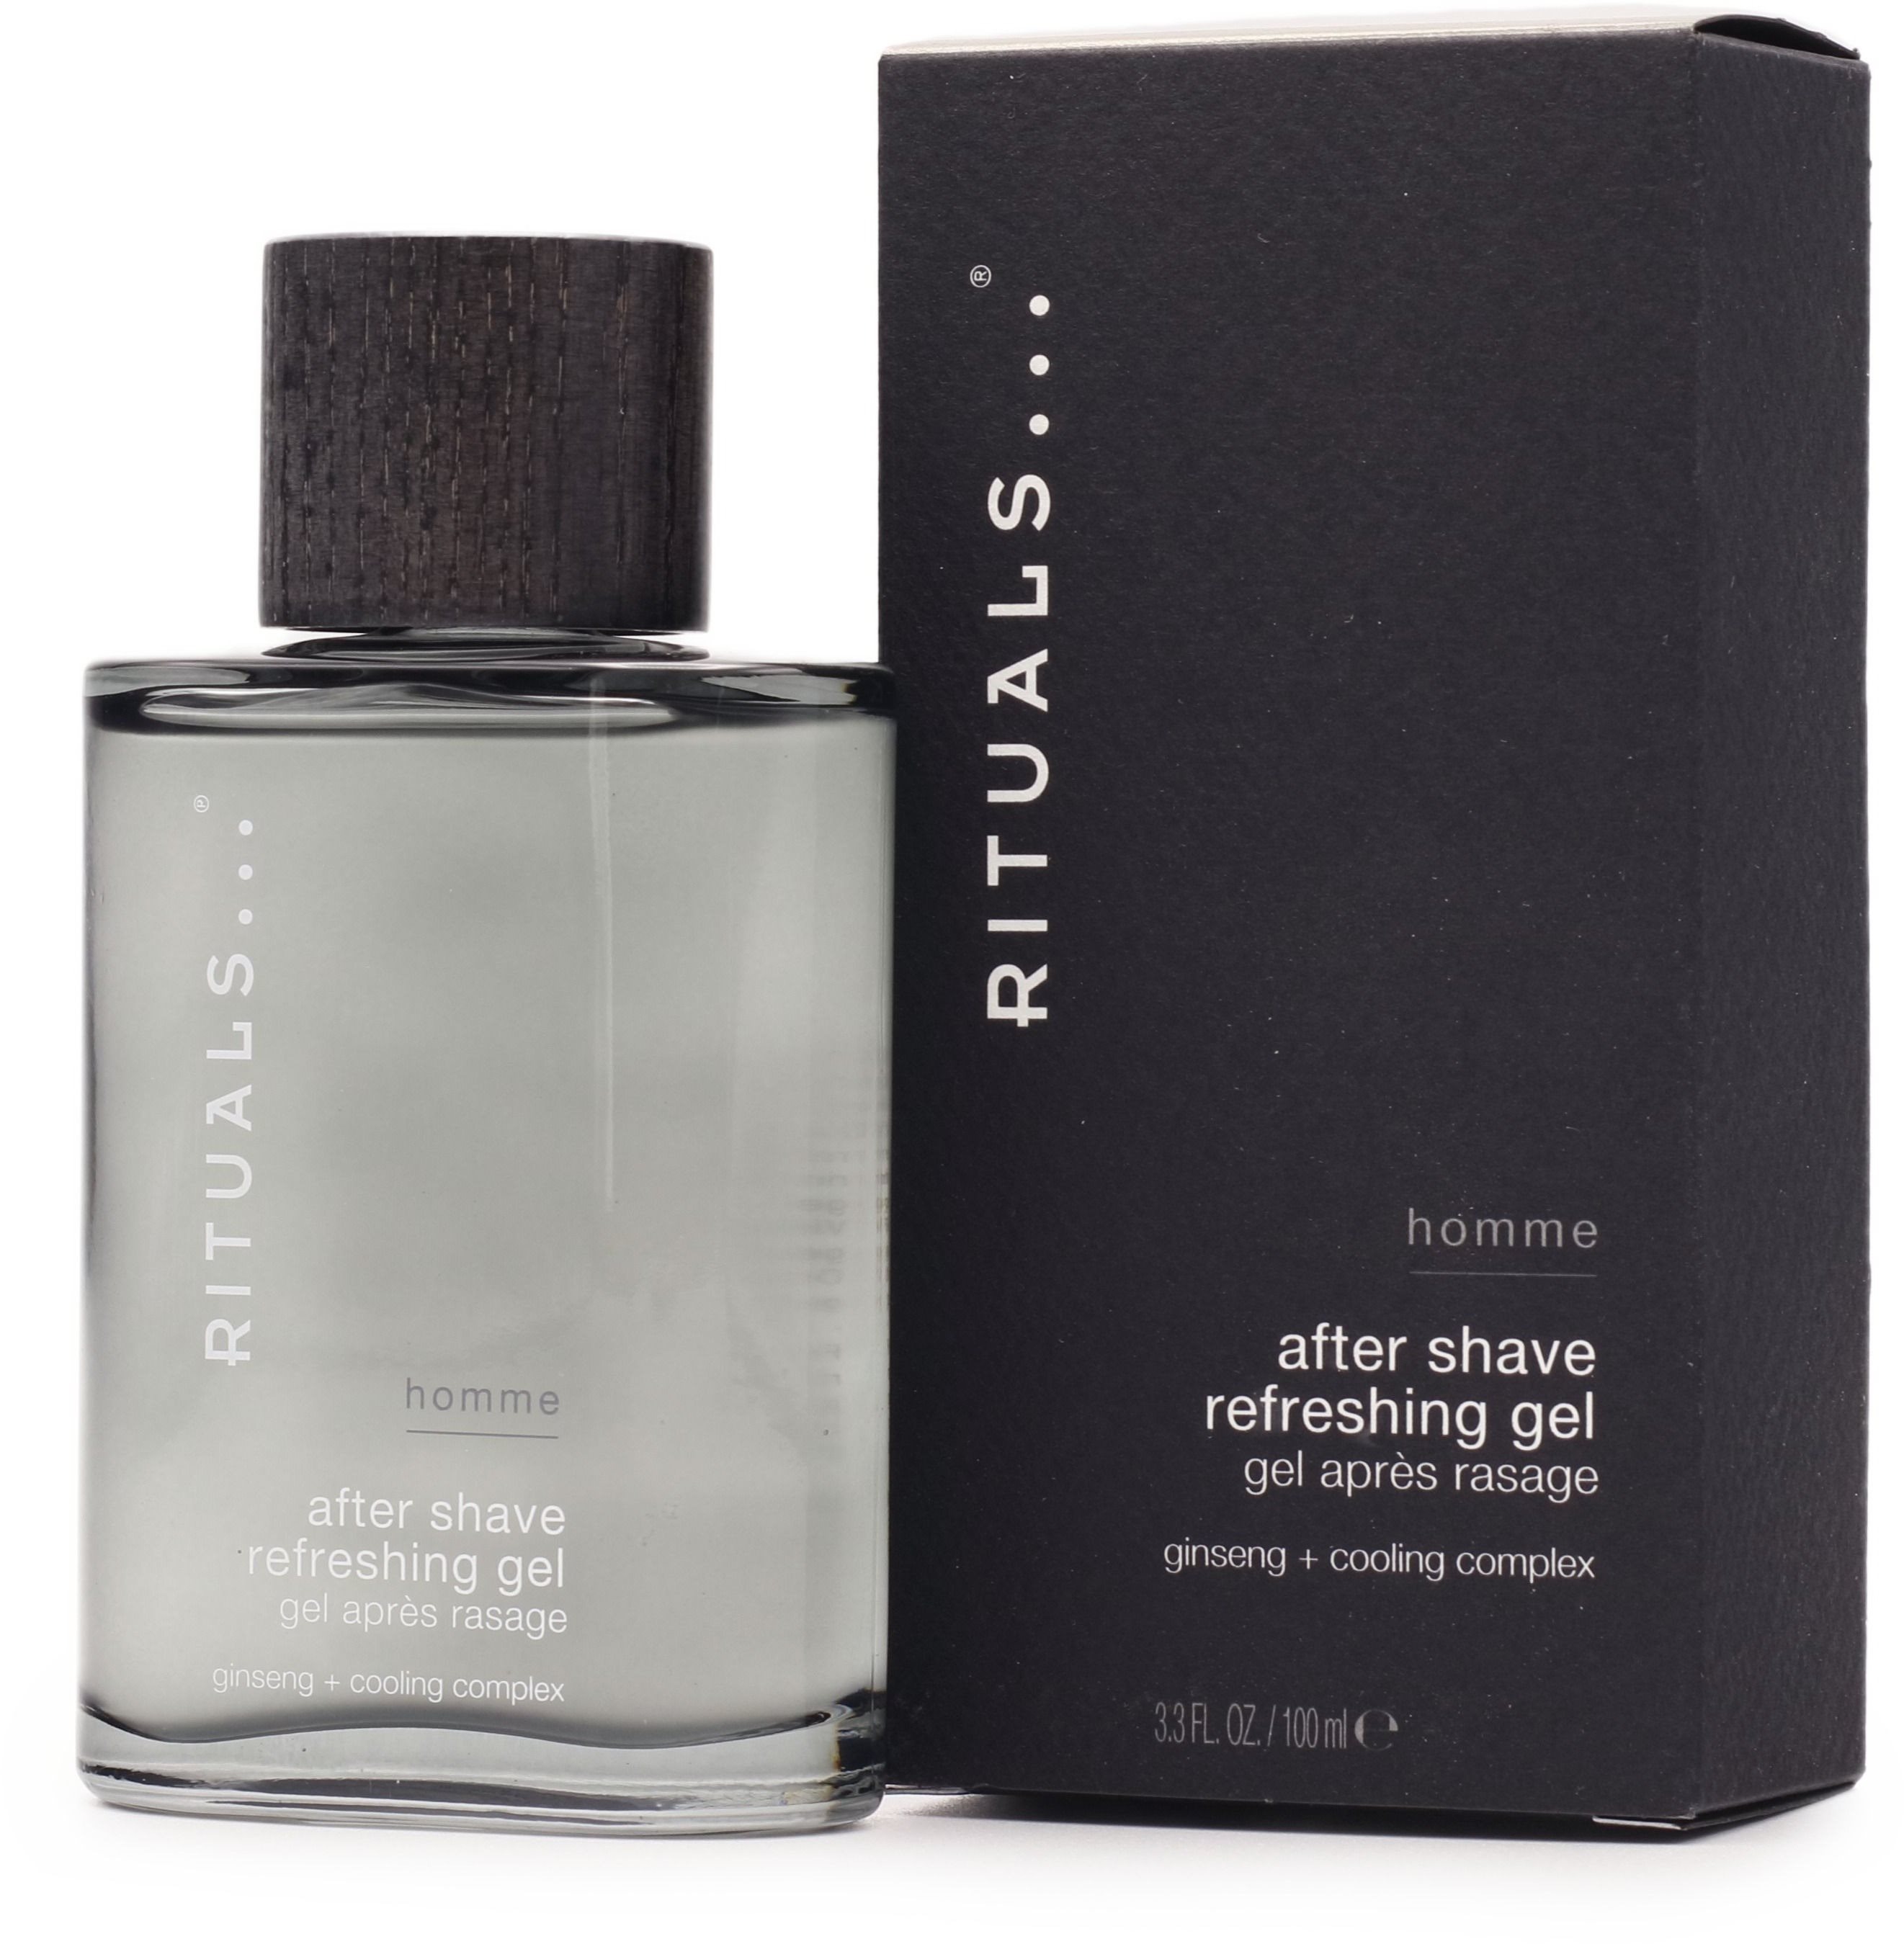 RITUALS Homme After Shave Refreshing Gel 100 ml